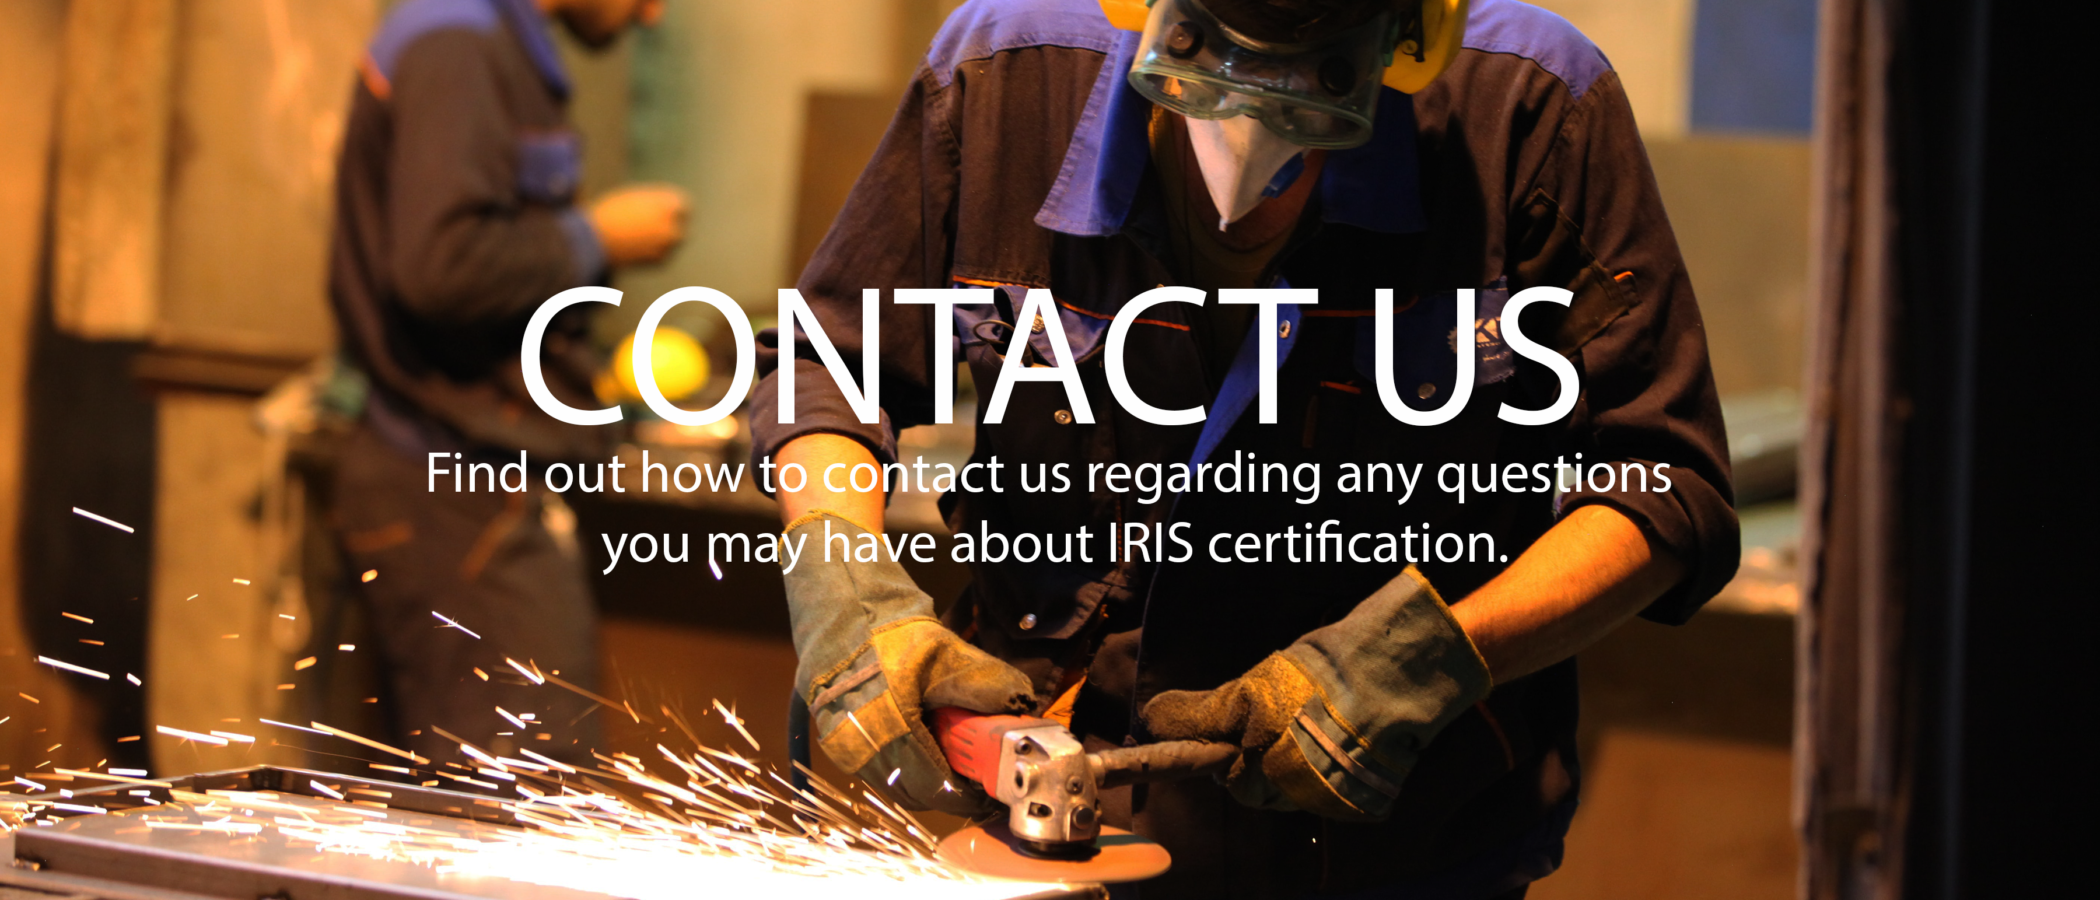 contact us find out how to contact us regarding any questions you may have about IRIS certification